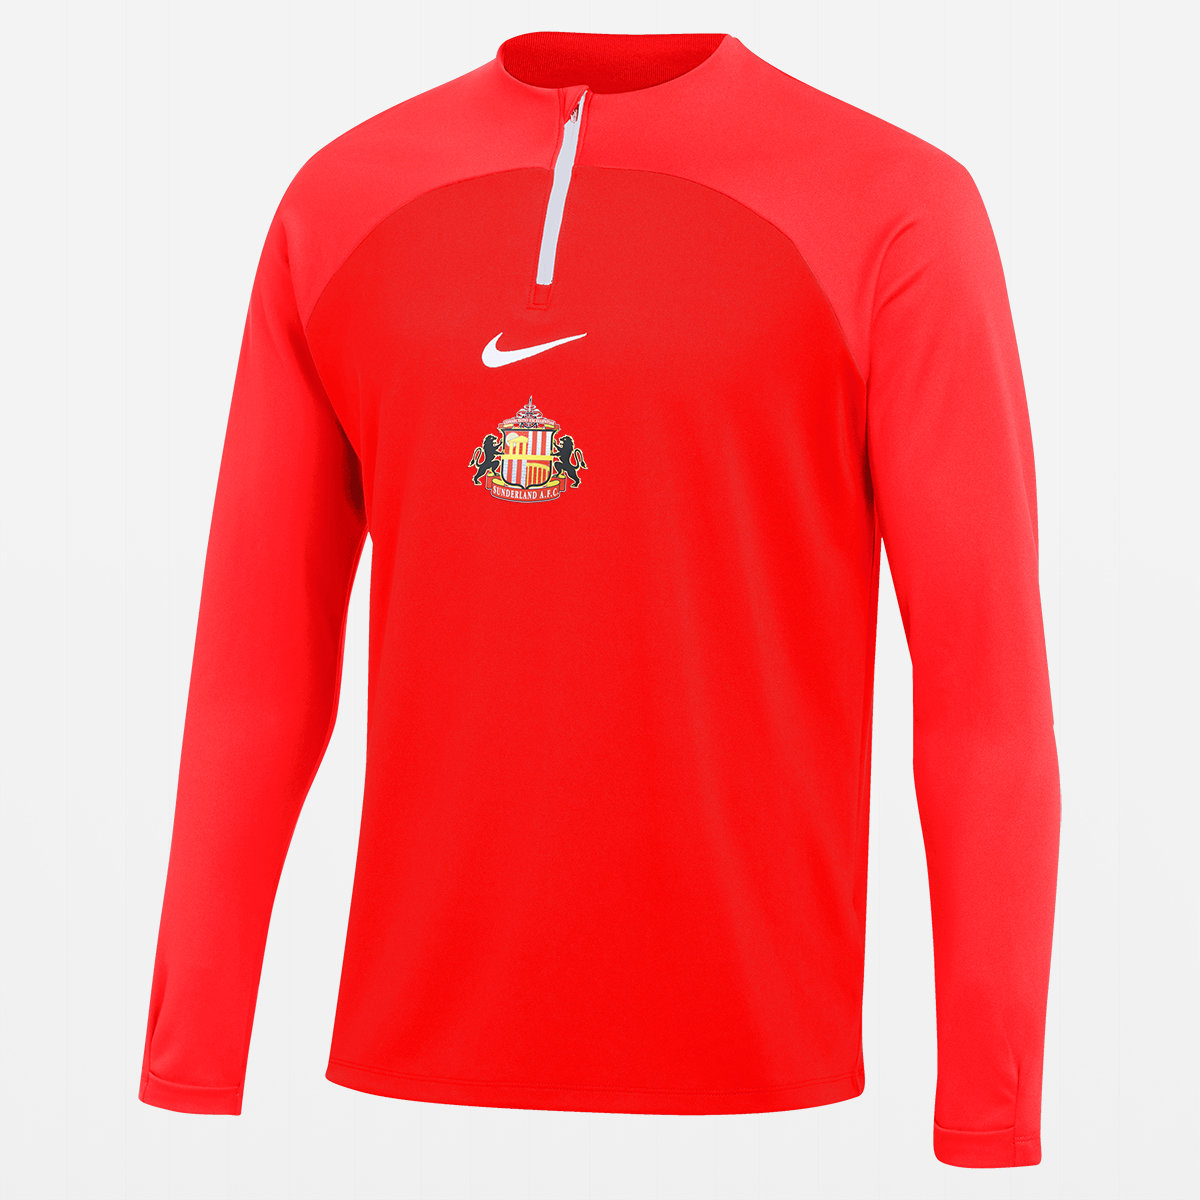 Buy the 22-23 SAFC Nike  Pro Drill Top online at Sunderland AFC Store